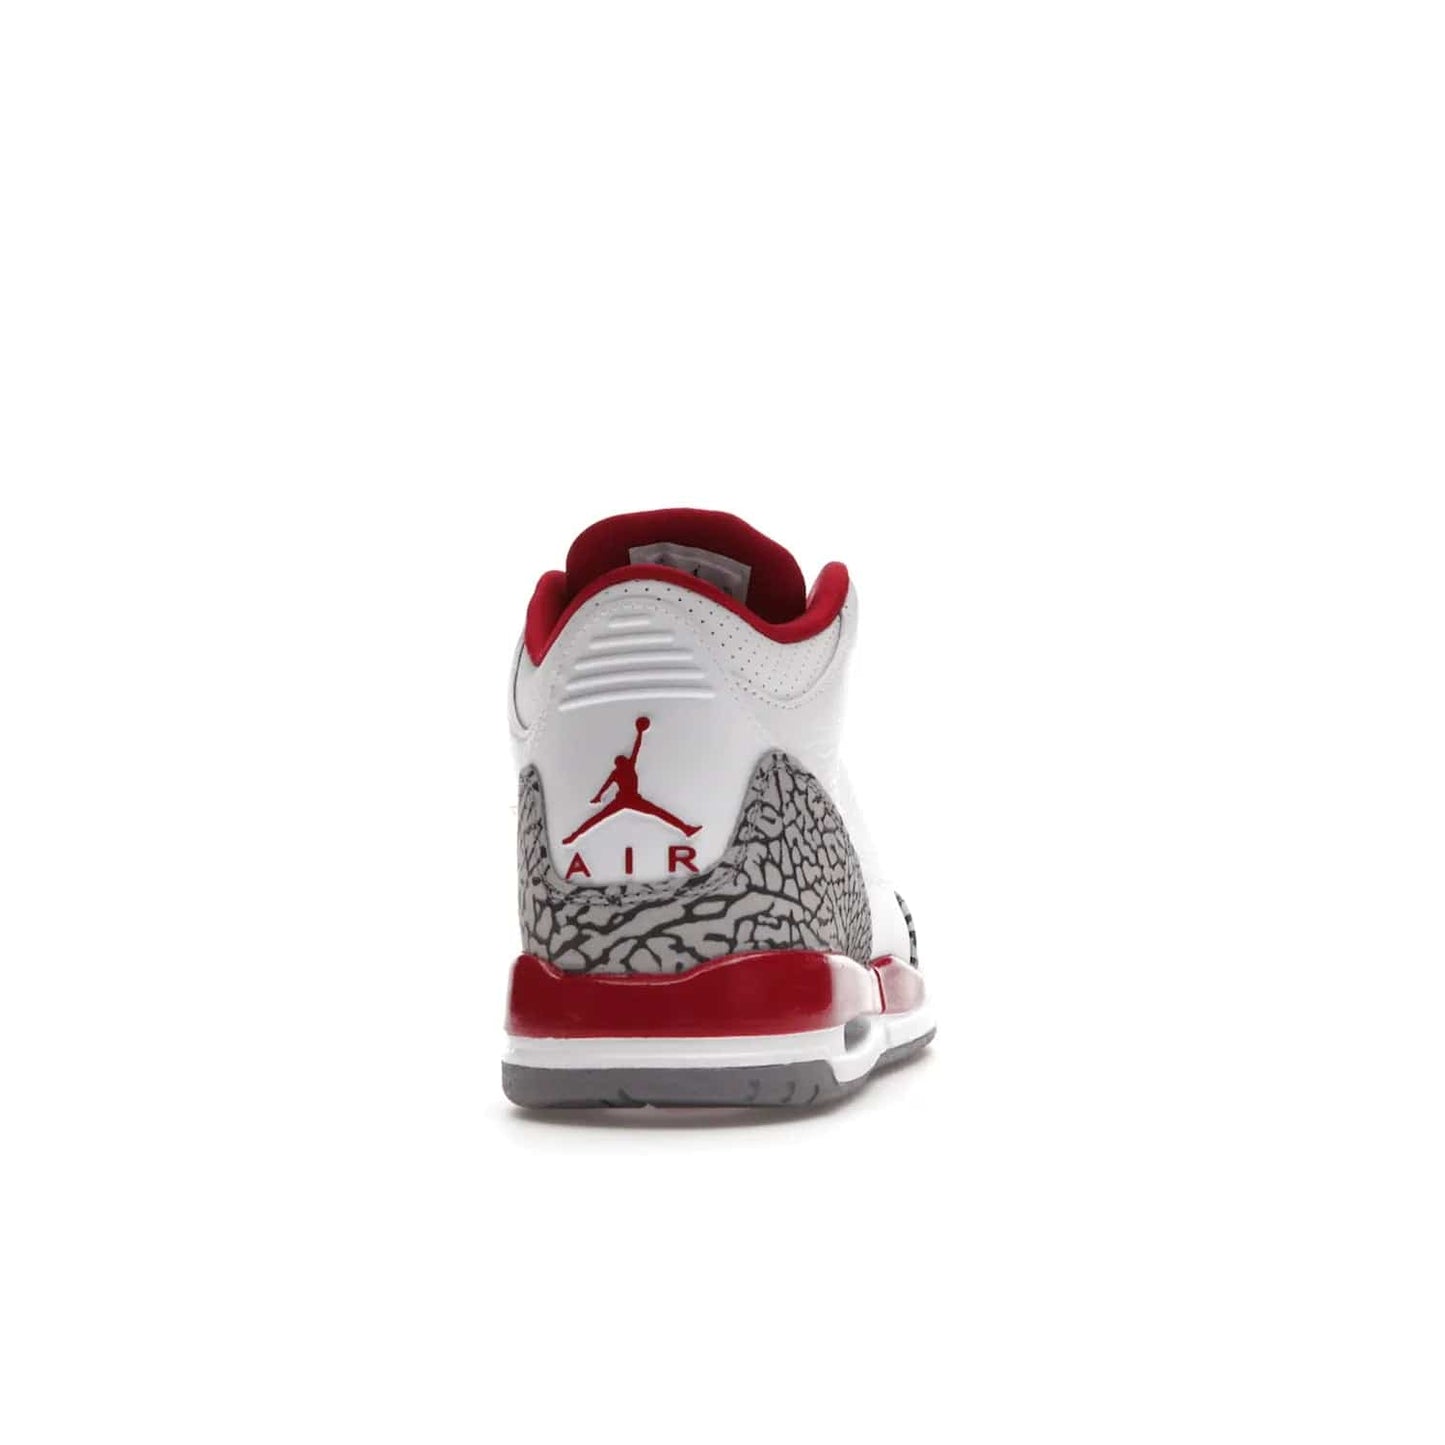 Jordan 3 Retro Cardinal (GS) - Image 29 - Only at www.BallersClubKickz.com - Shop the kid-sized Air Jordan 3 Retro Cardinal GS, released Feb 2022. White tumbled leather upper, light curry accenting, cement grey and classic red details throughout. Visible Air cushioning, midsole, and an eye-catching outsole. Show off your style with this fashionable streetwear silhouette.